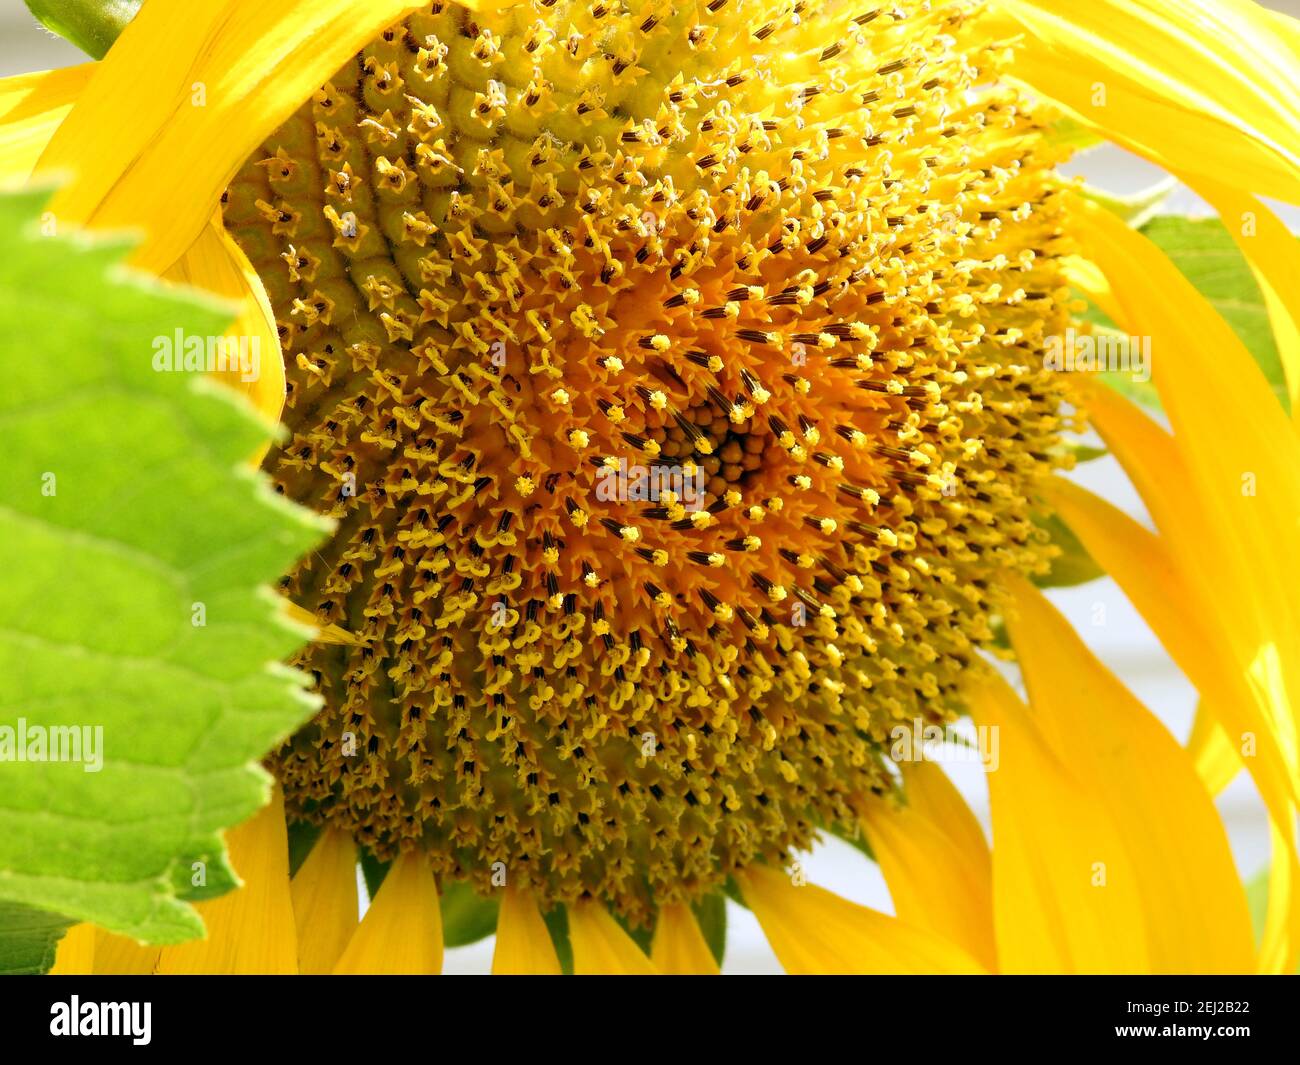 A close-up view for a growing common sunflower, Helianthus annuus Stock Photo